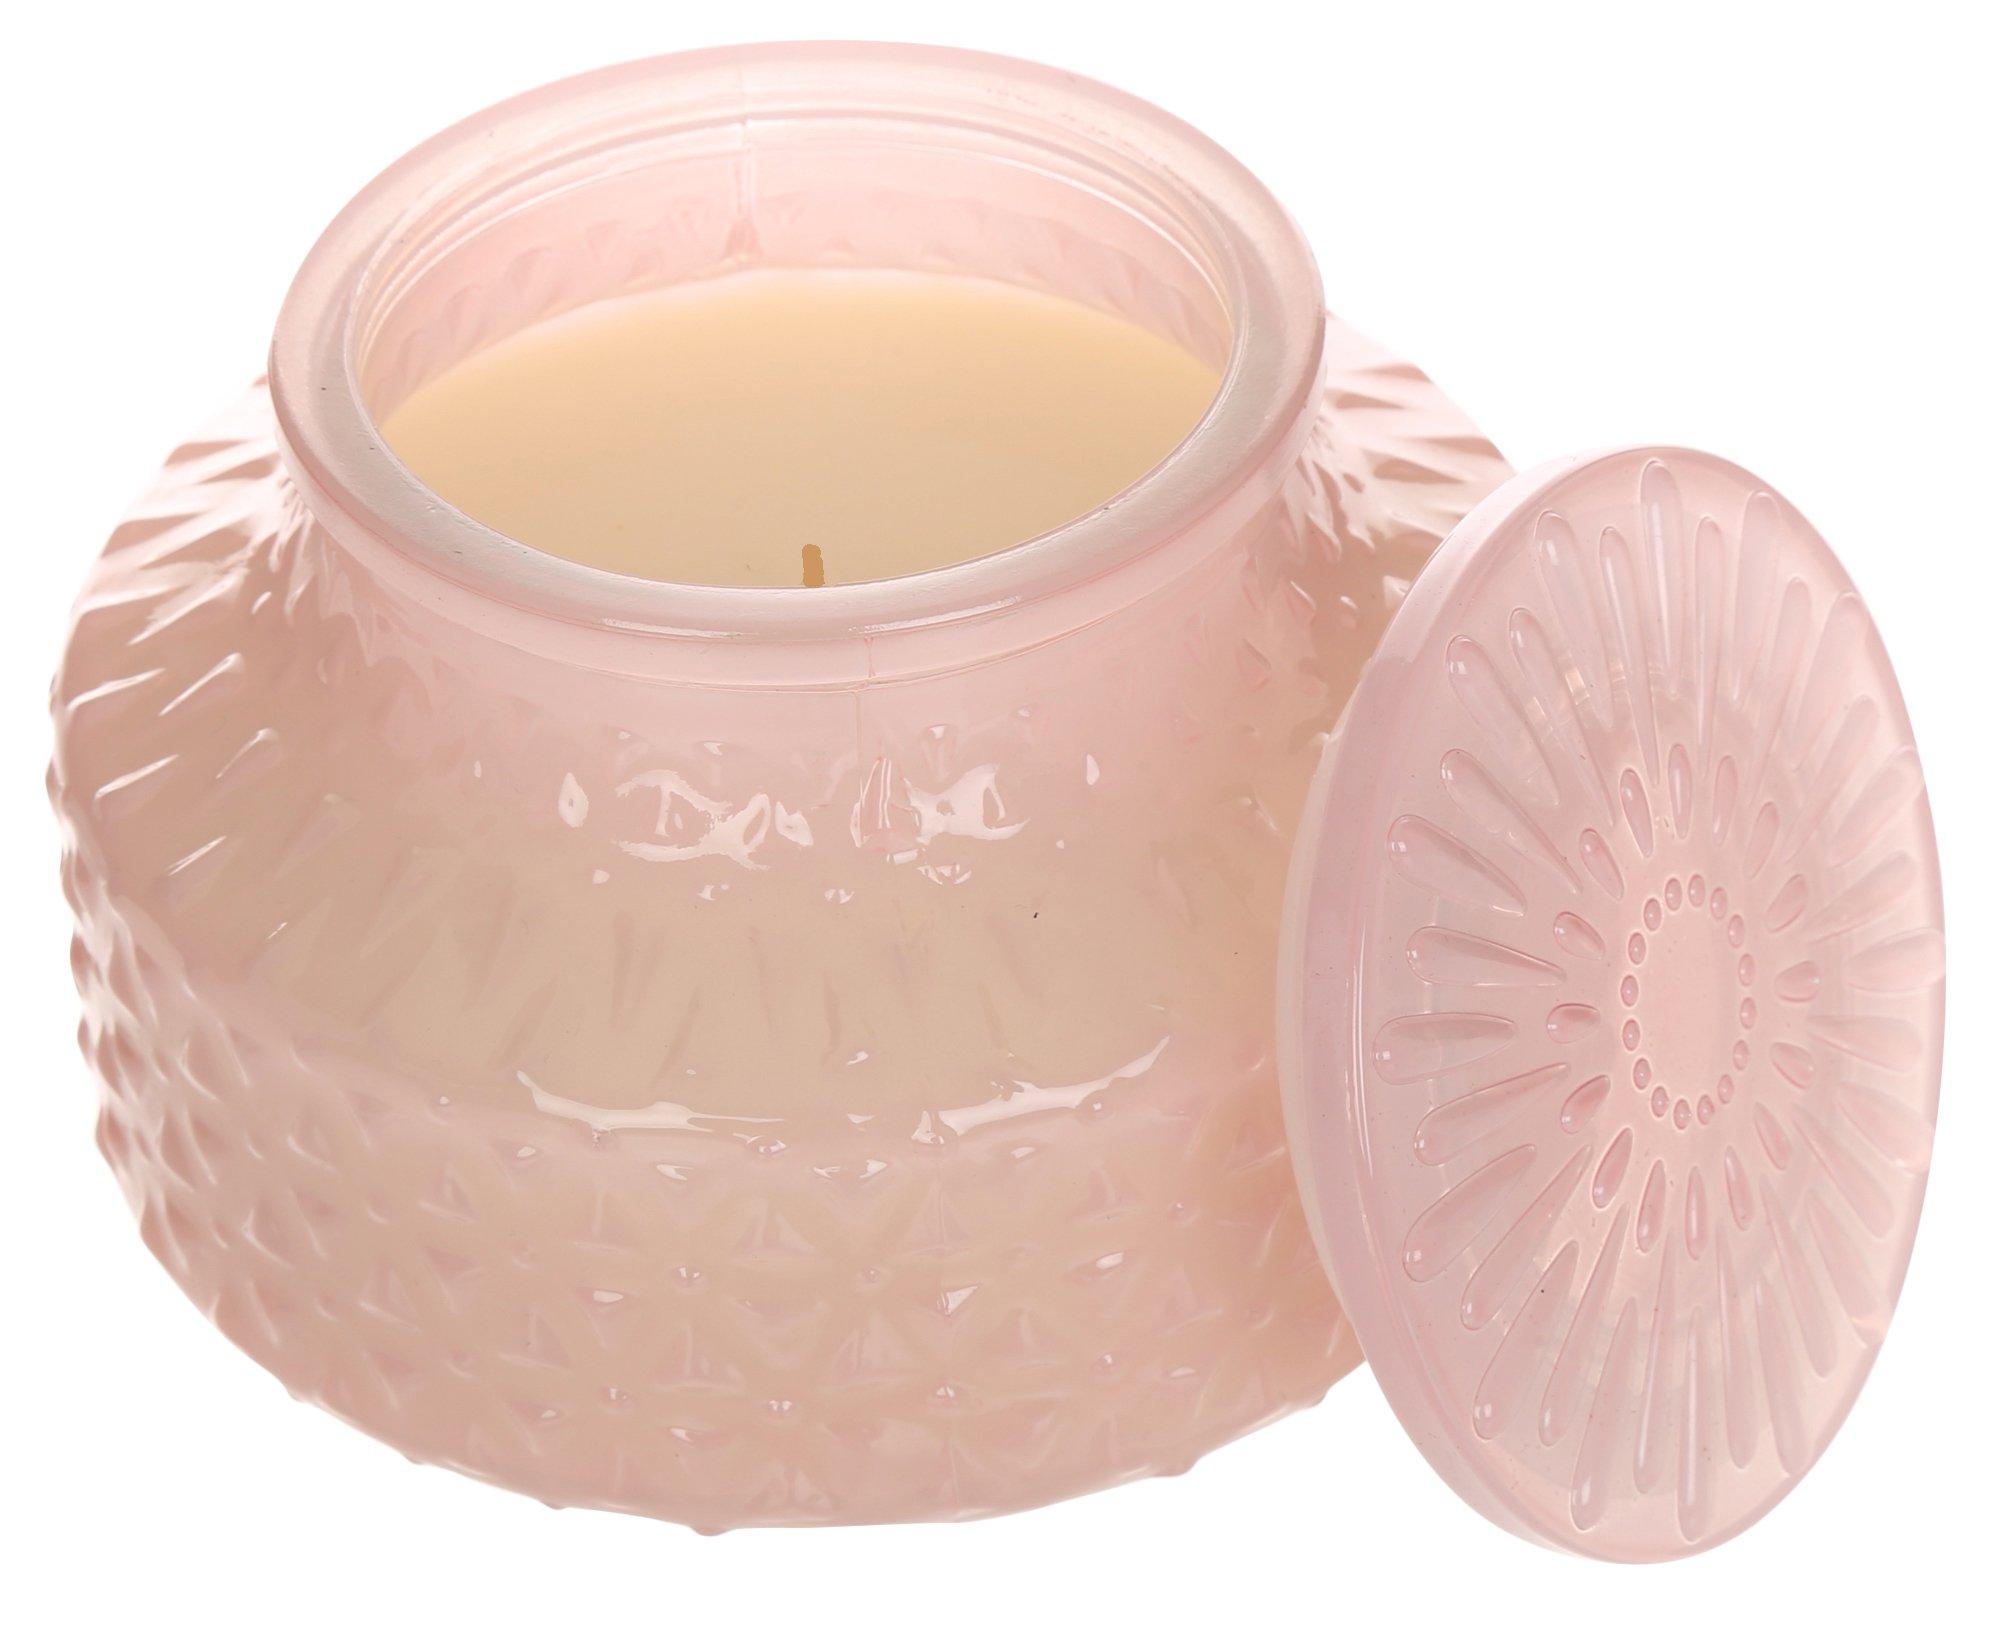 14 oz Wild Rose Scented Candle